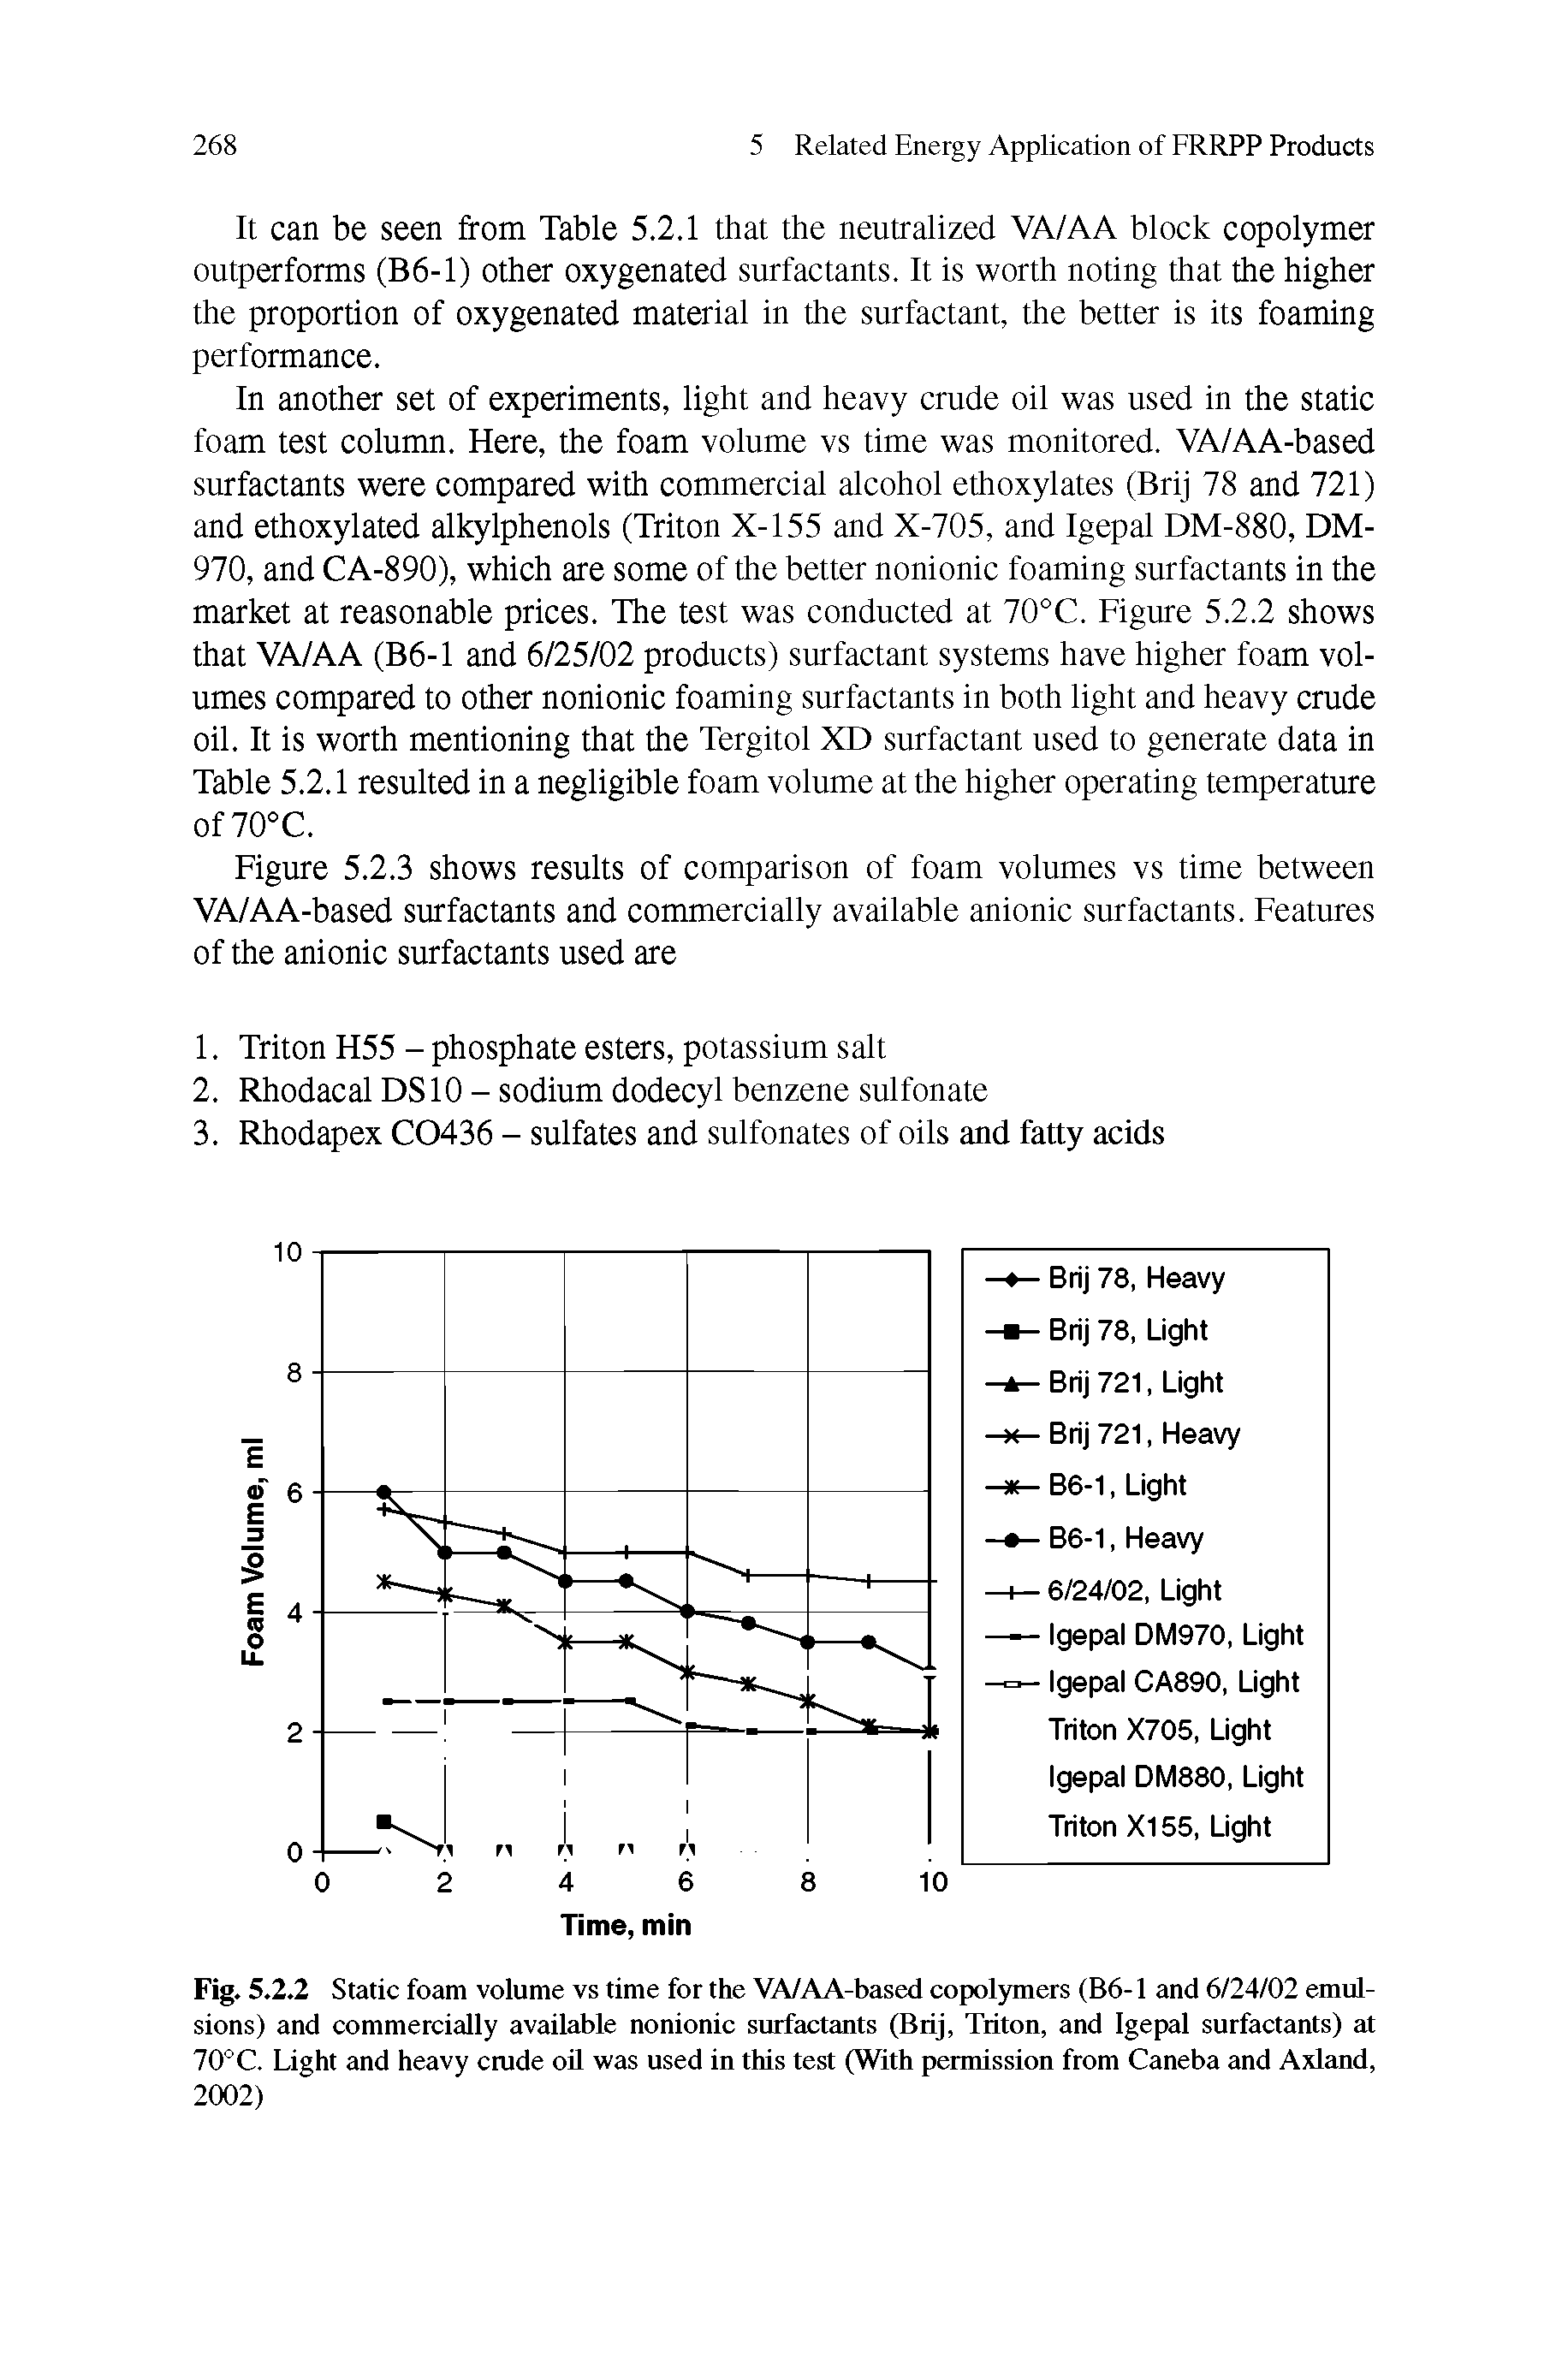 Fig. 5.2.2 Static foam volume vs time for the VA/AA-based copolymers (B6-1 and 6/24/02 emulsions) and commercially available nonionic surfactants (Brij, Triton, and Igepal surfactants) at 70°C. Light and heavy crude oil was used in this test (With permission from Caneba and Adand, 2002)...